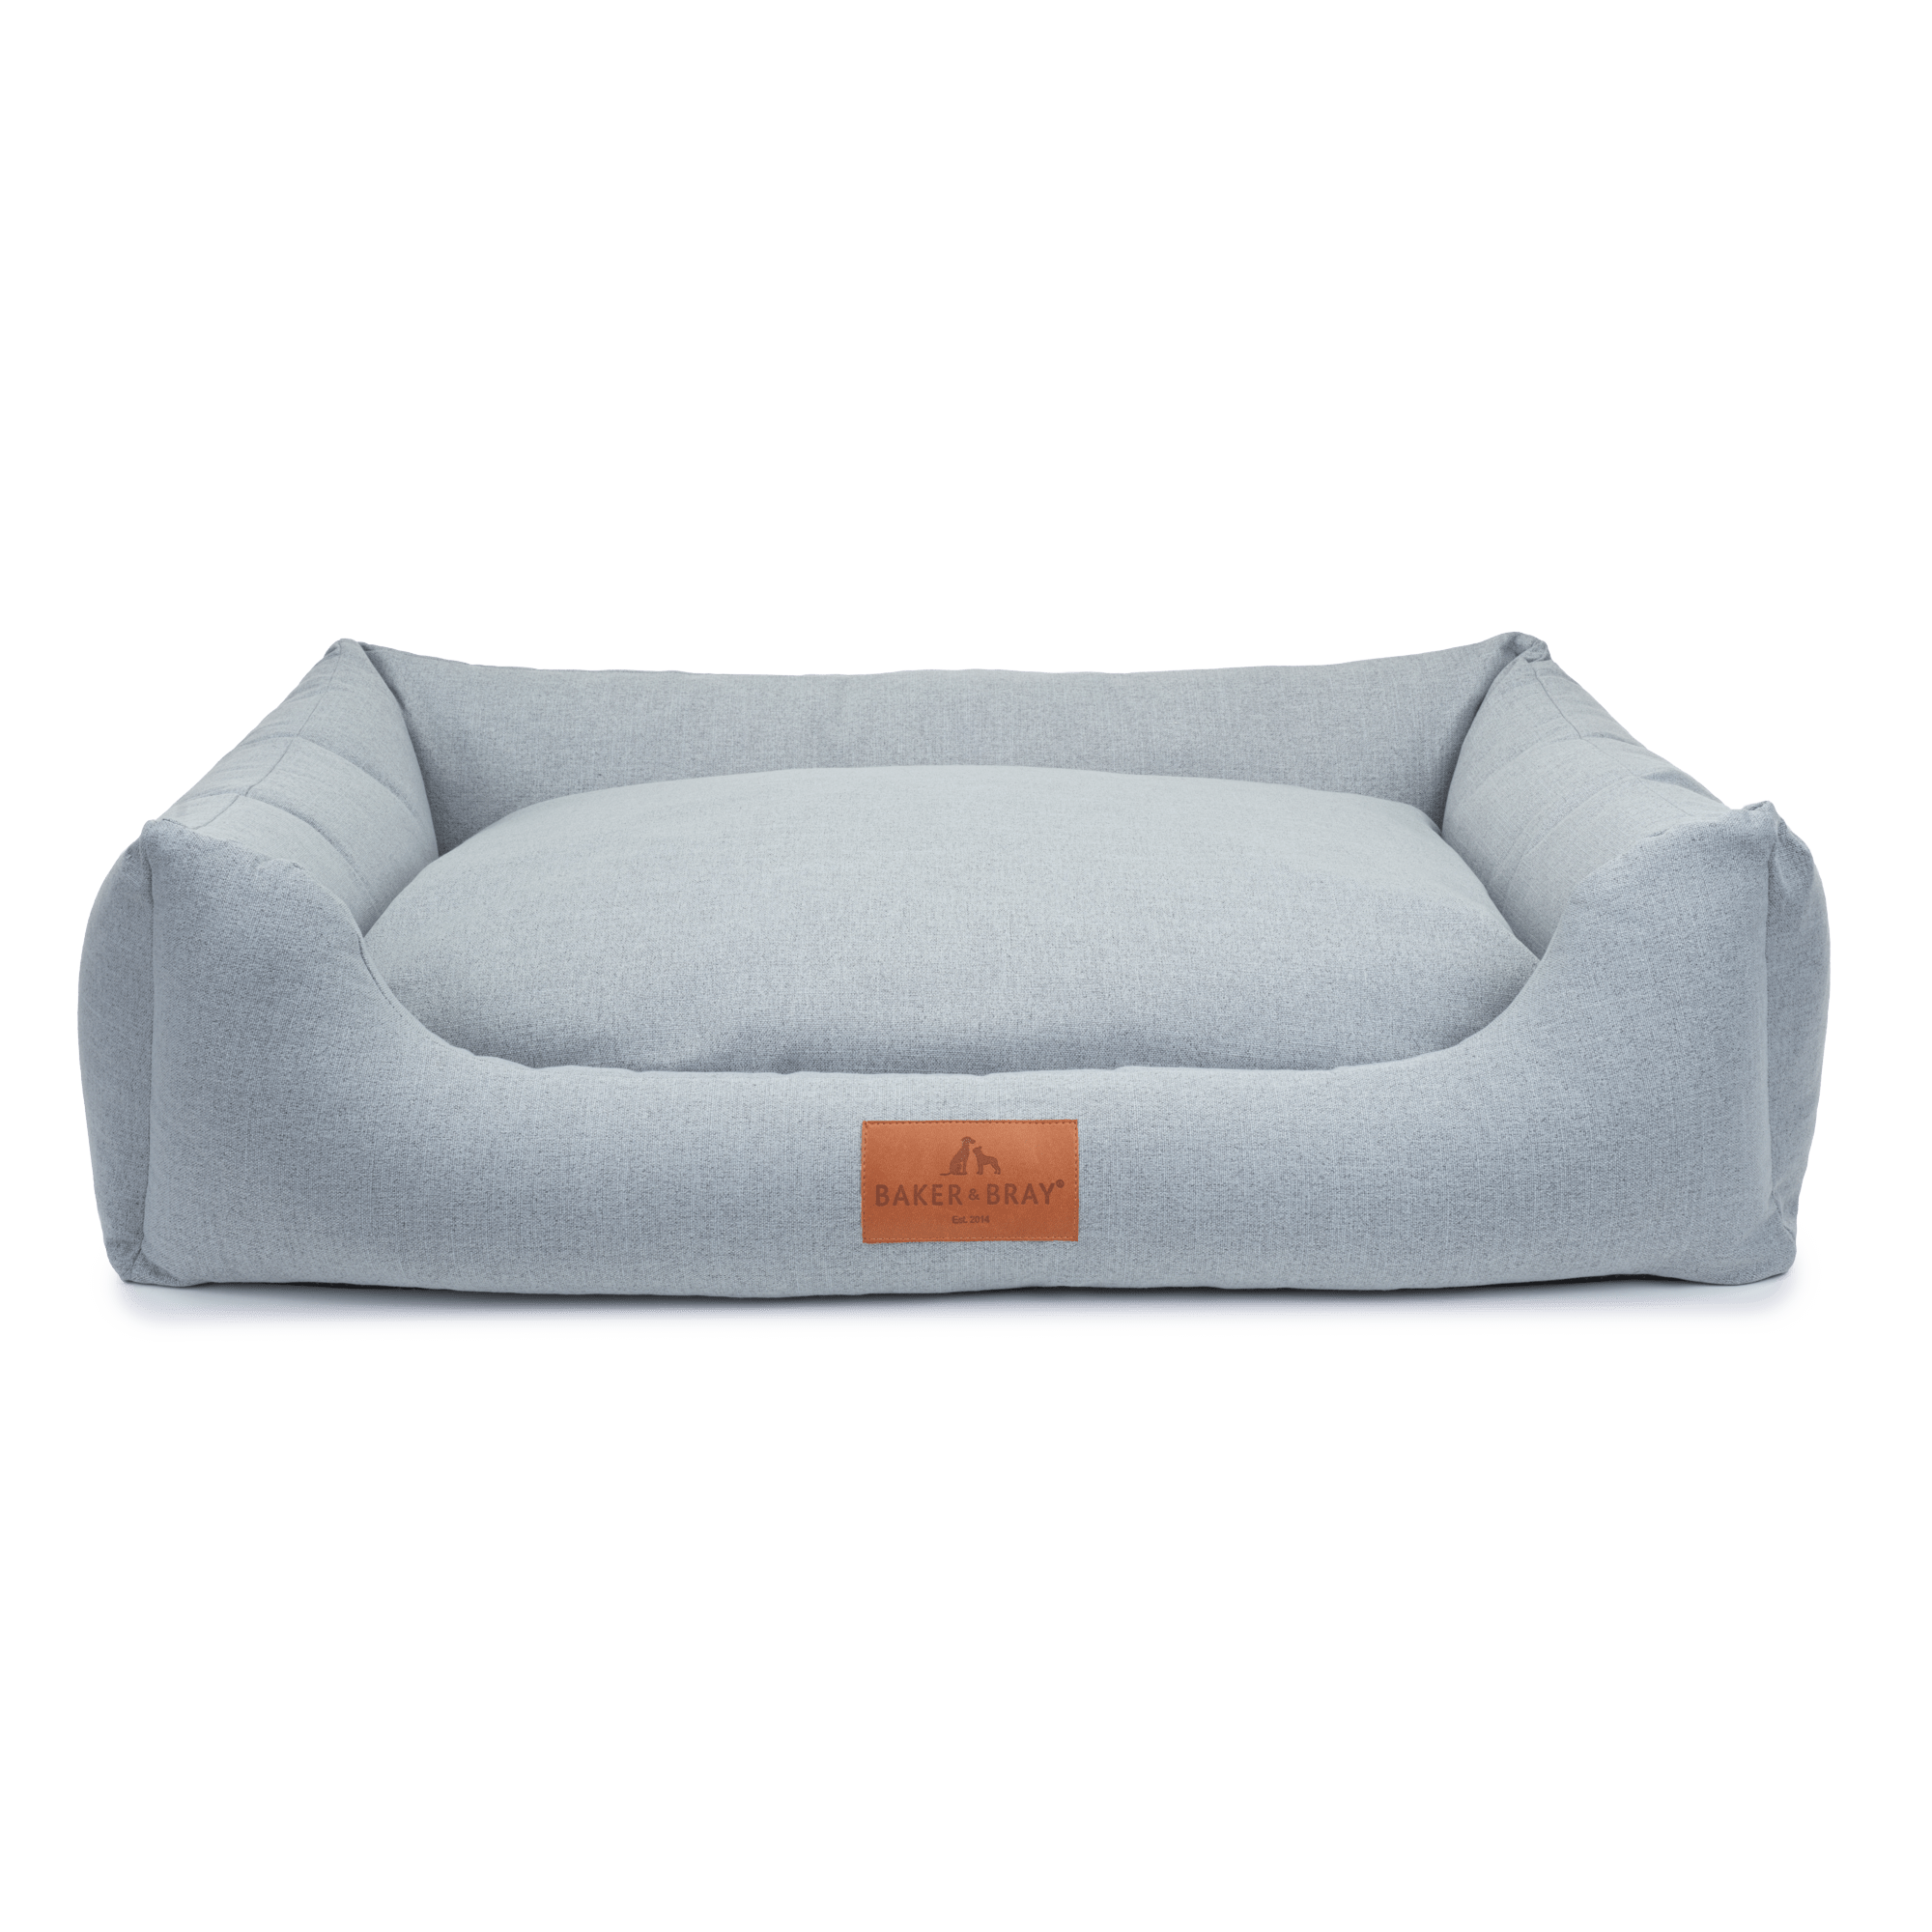 Interchangeable Spare Covers For Eco Luxe Dog Bed - Baker & Bray